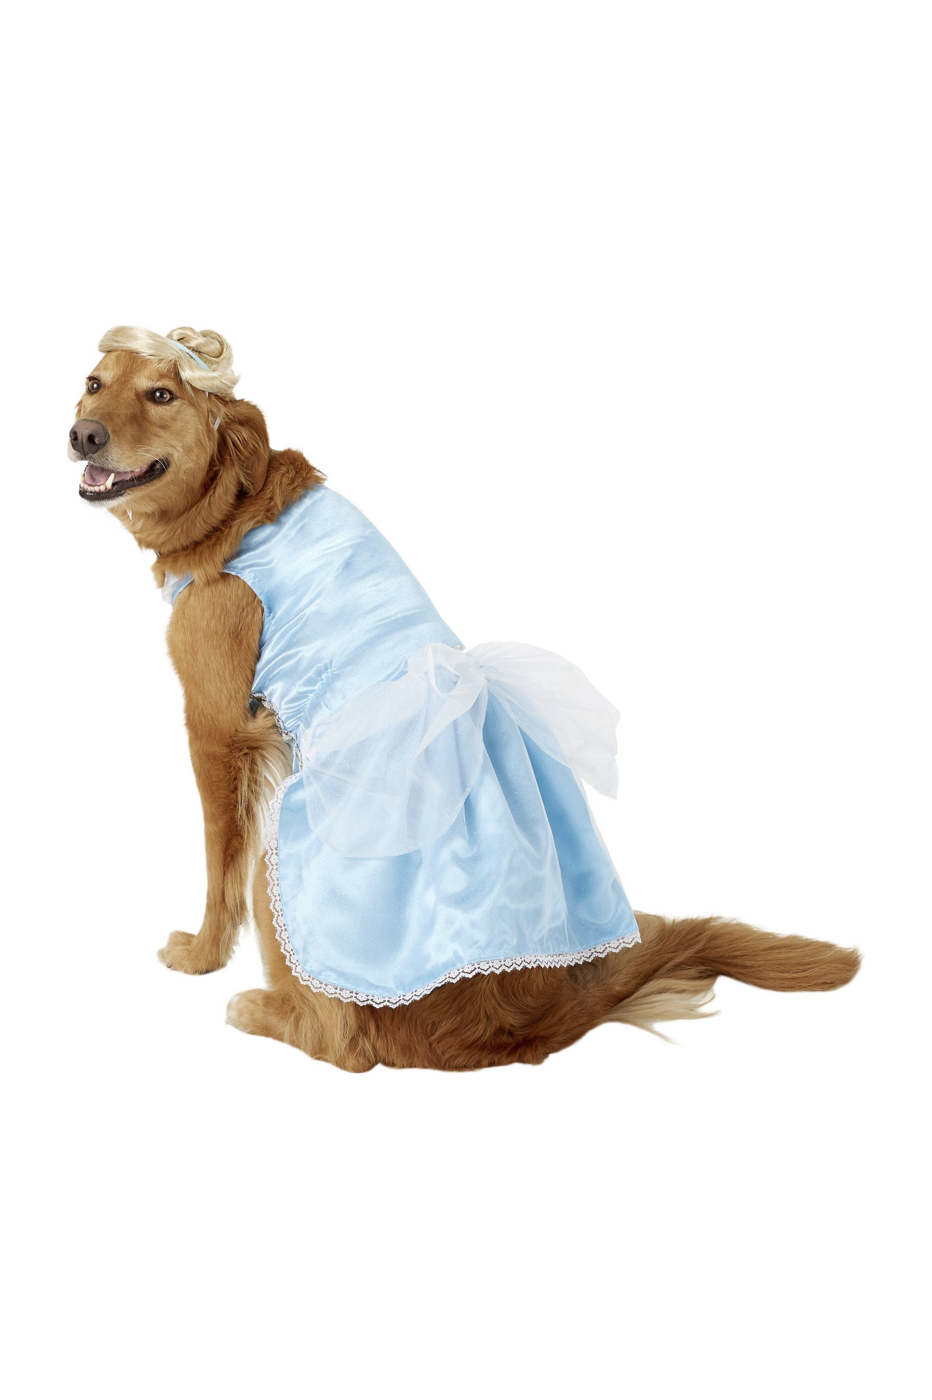 Best Dog Halloween Costumes! (judges decide cute and funny dog